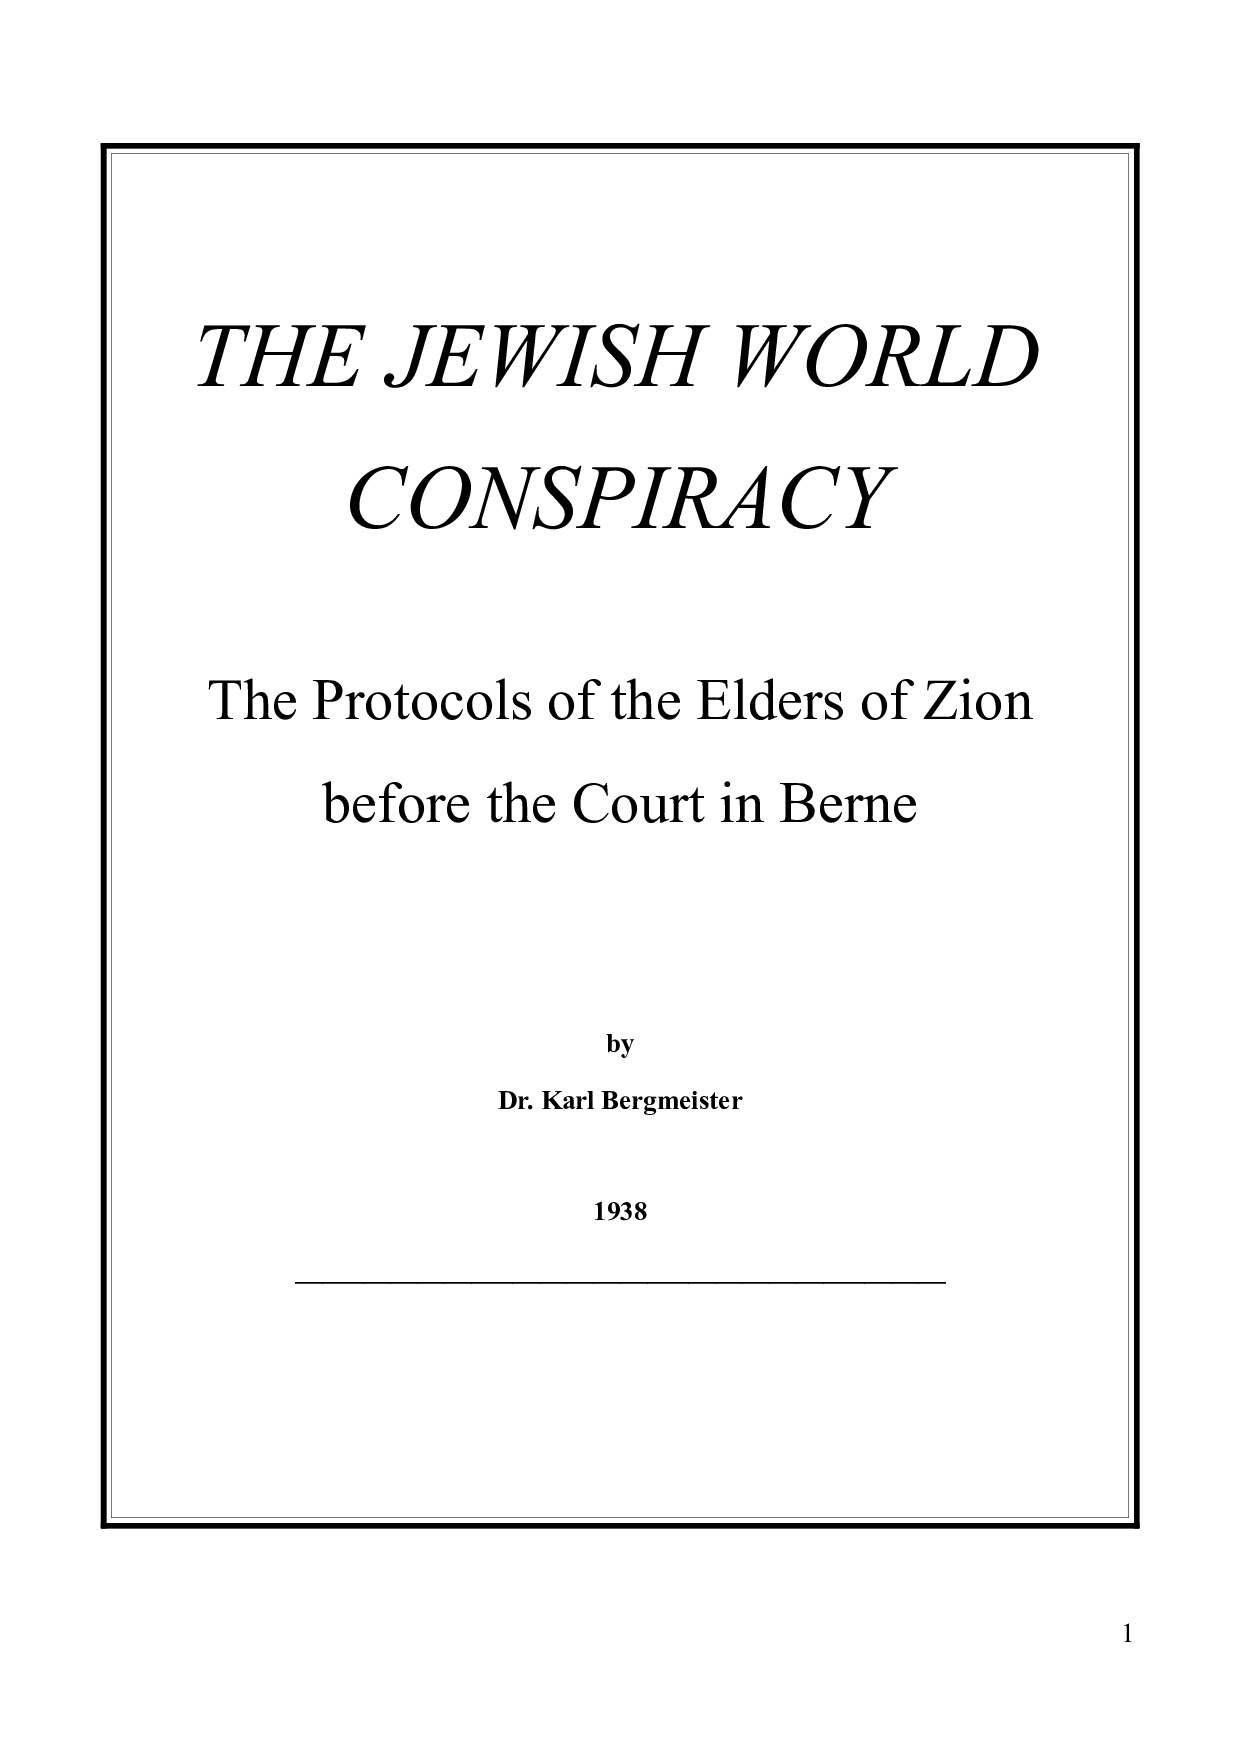 The Jewish World Conspiracy : The Protocols of the Elders of Zion before the court in Berne